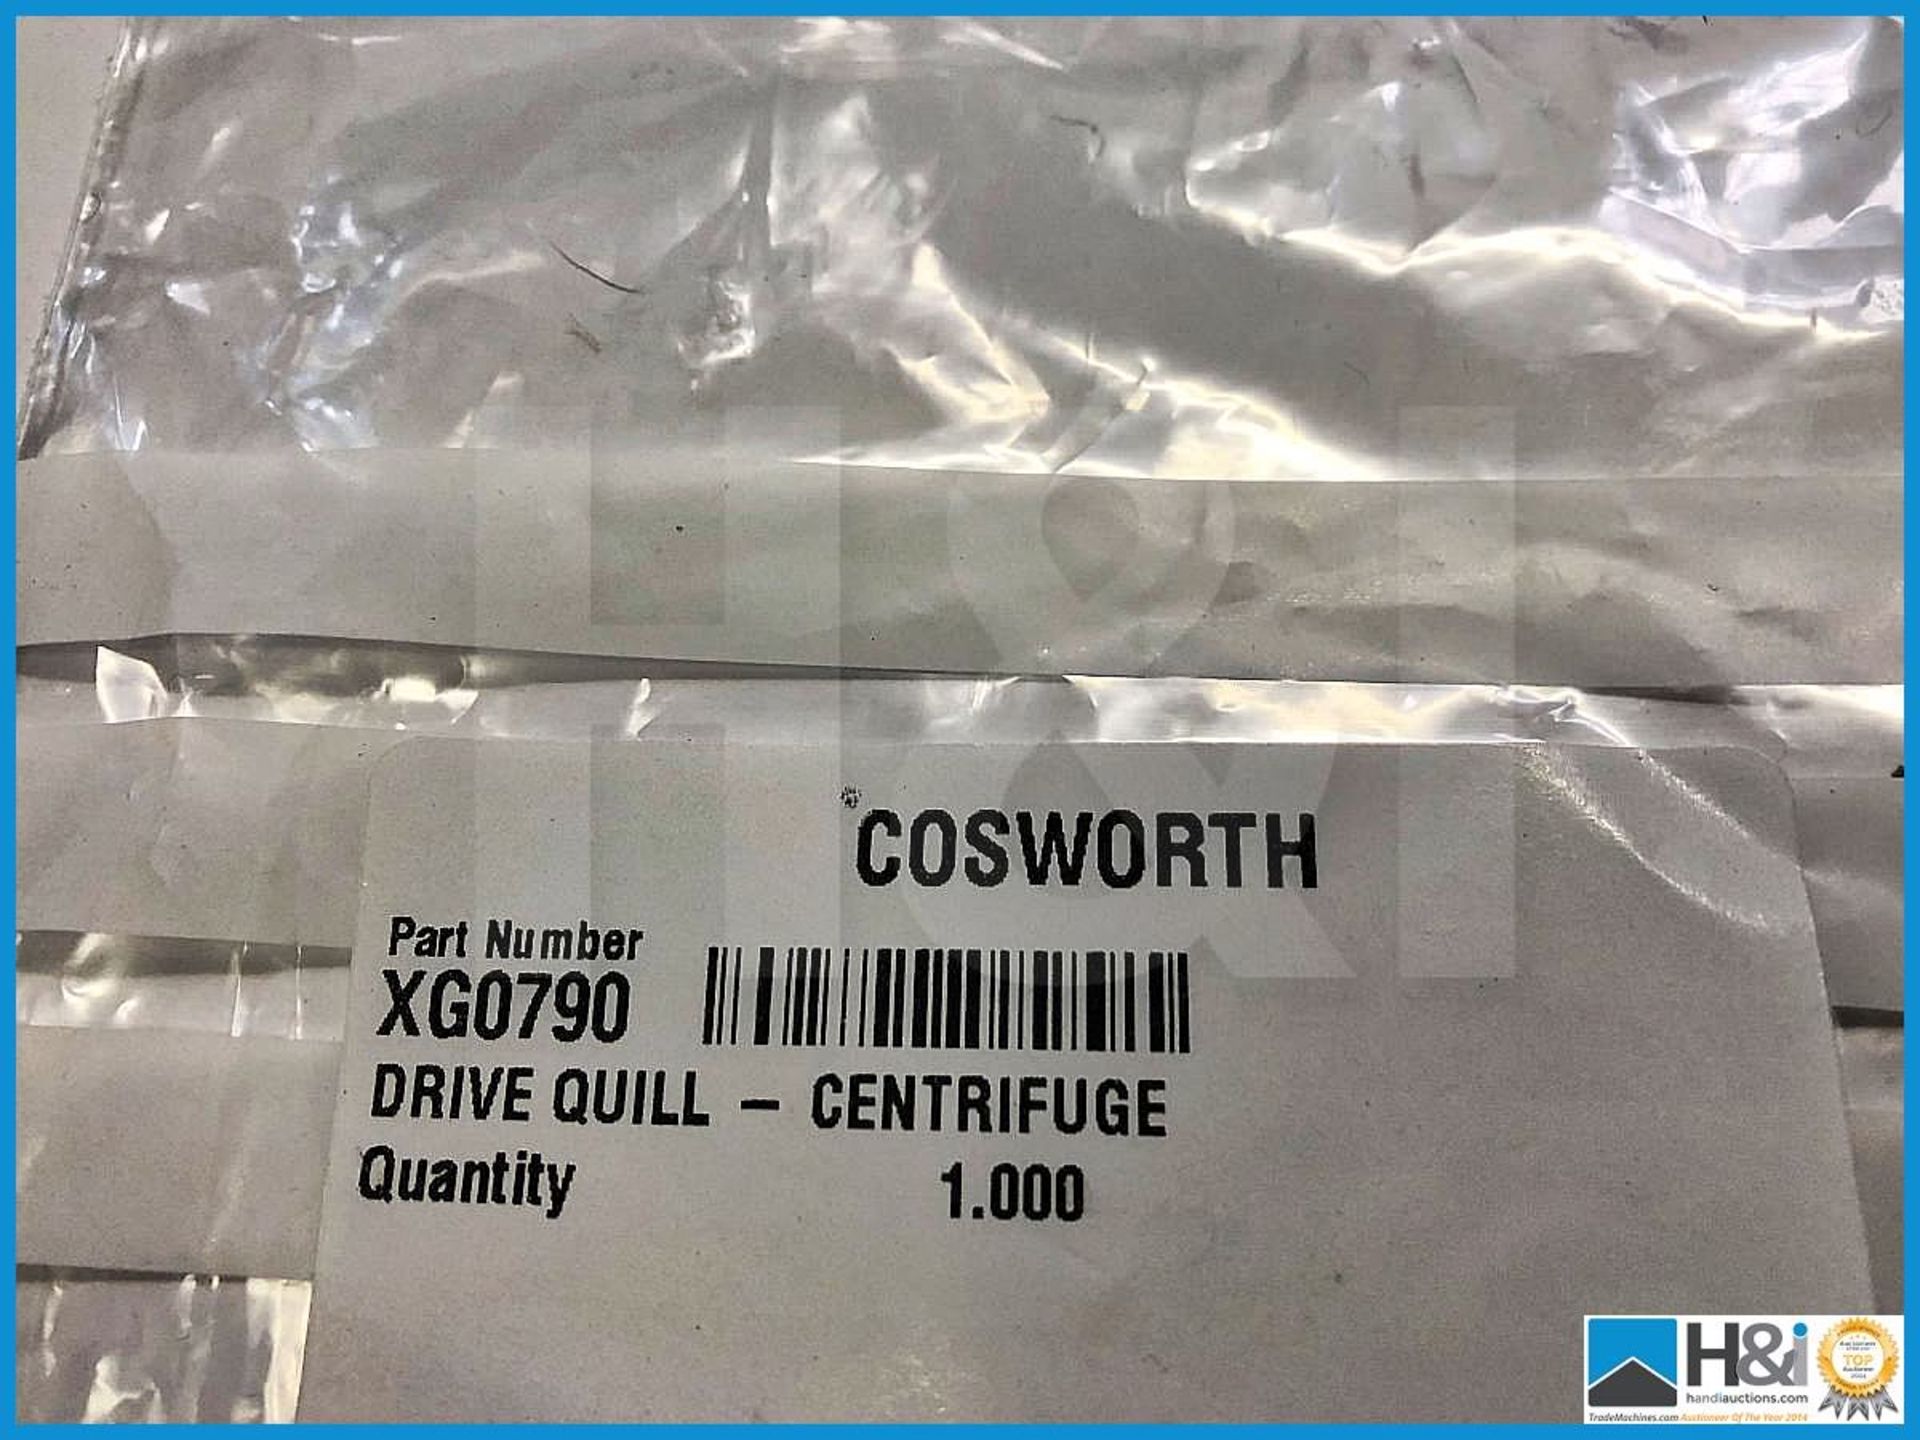 40 x Cosworth XG IndyCar Drive Quill - Centrifuge. Code XG0790. Lot 170. RRP GBP 3216 - Image 3 of 3